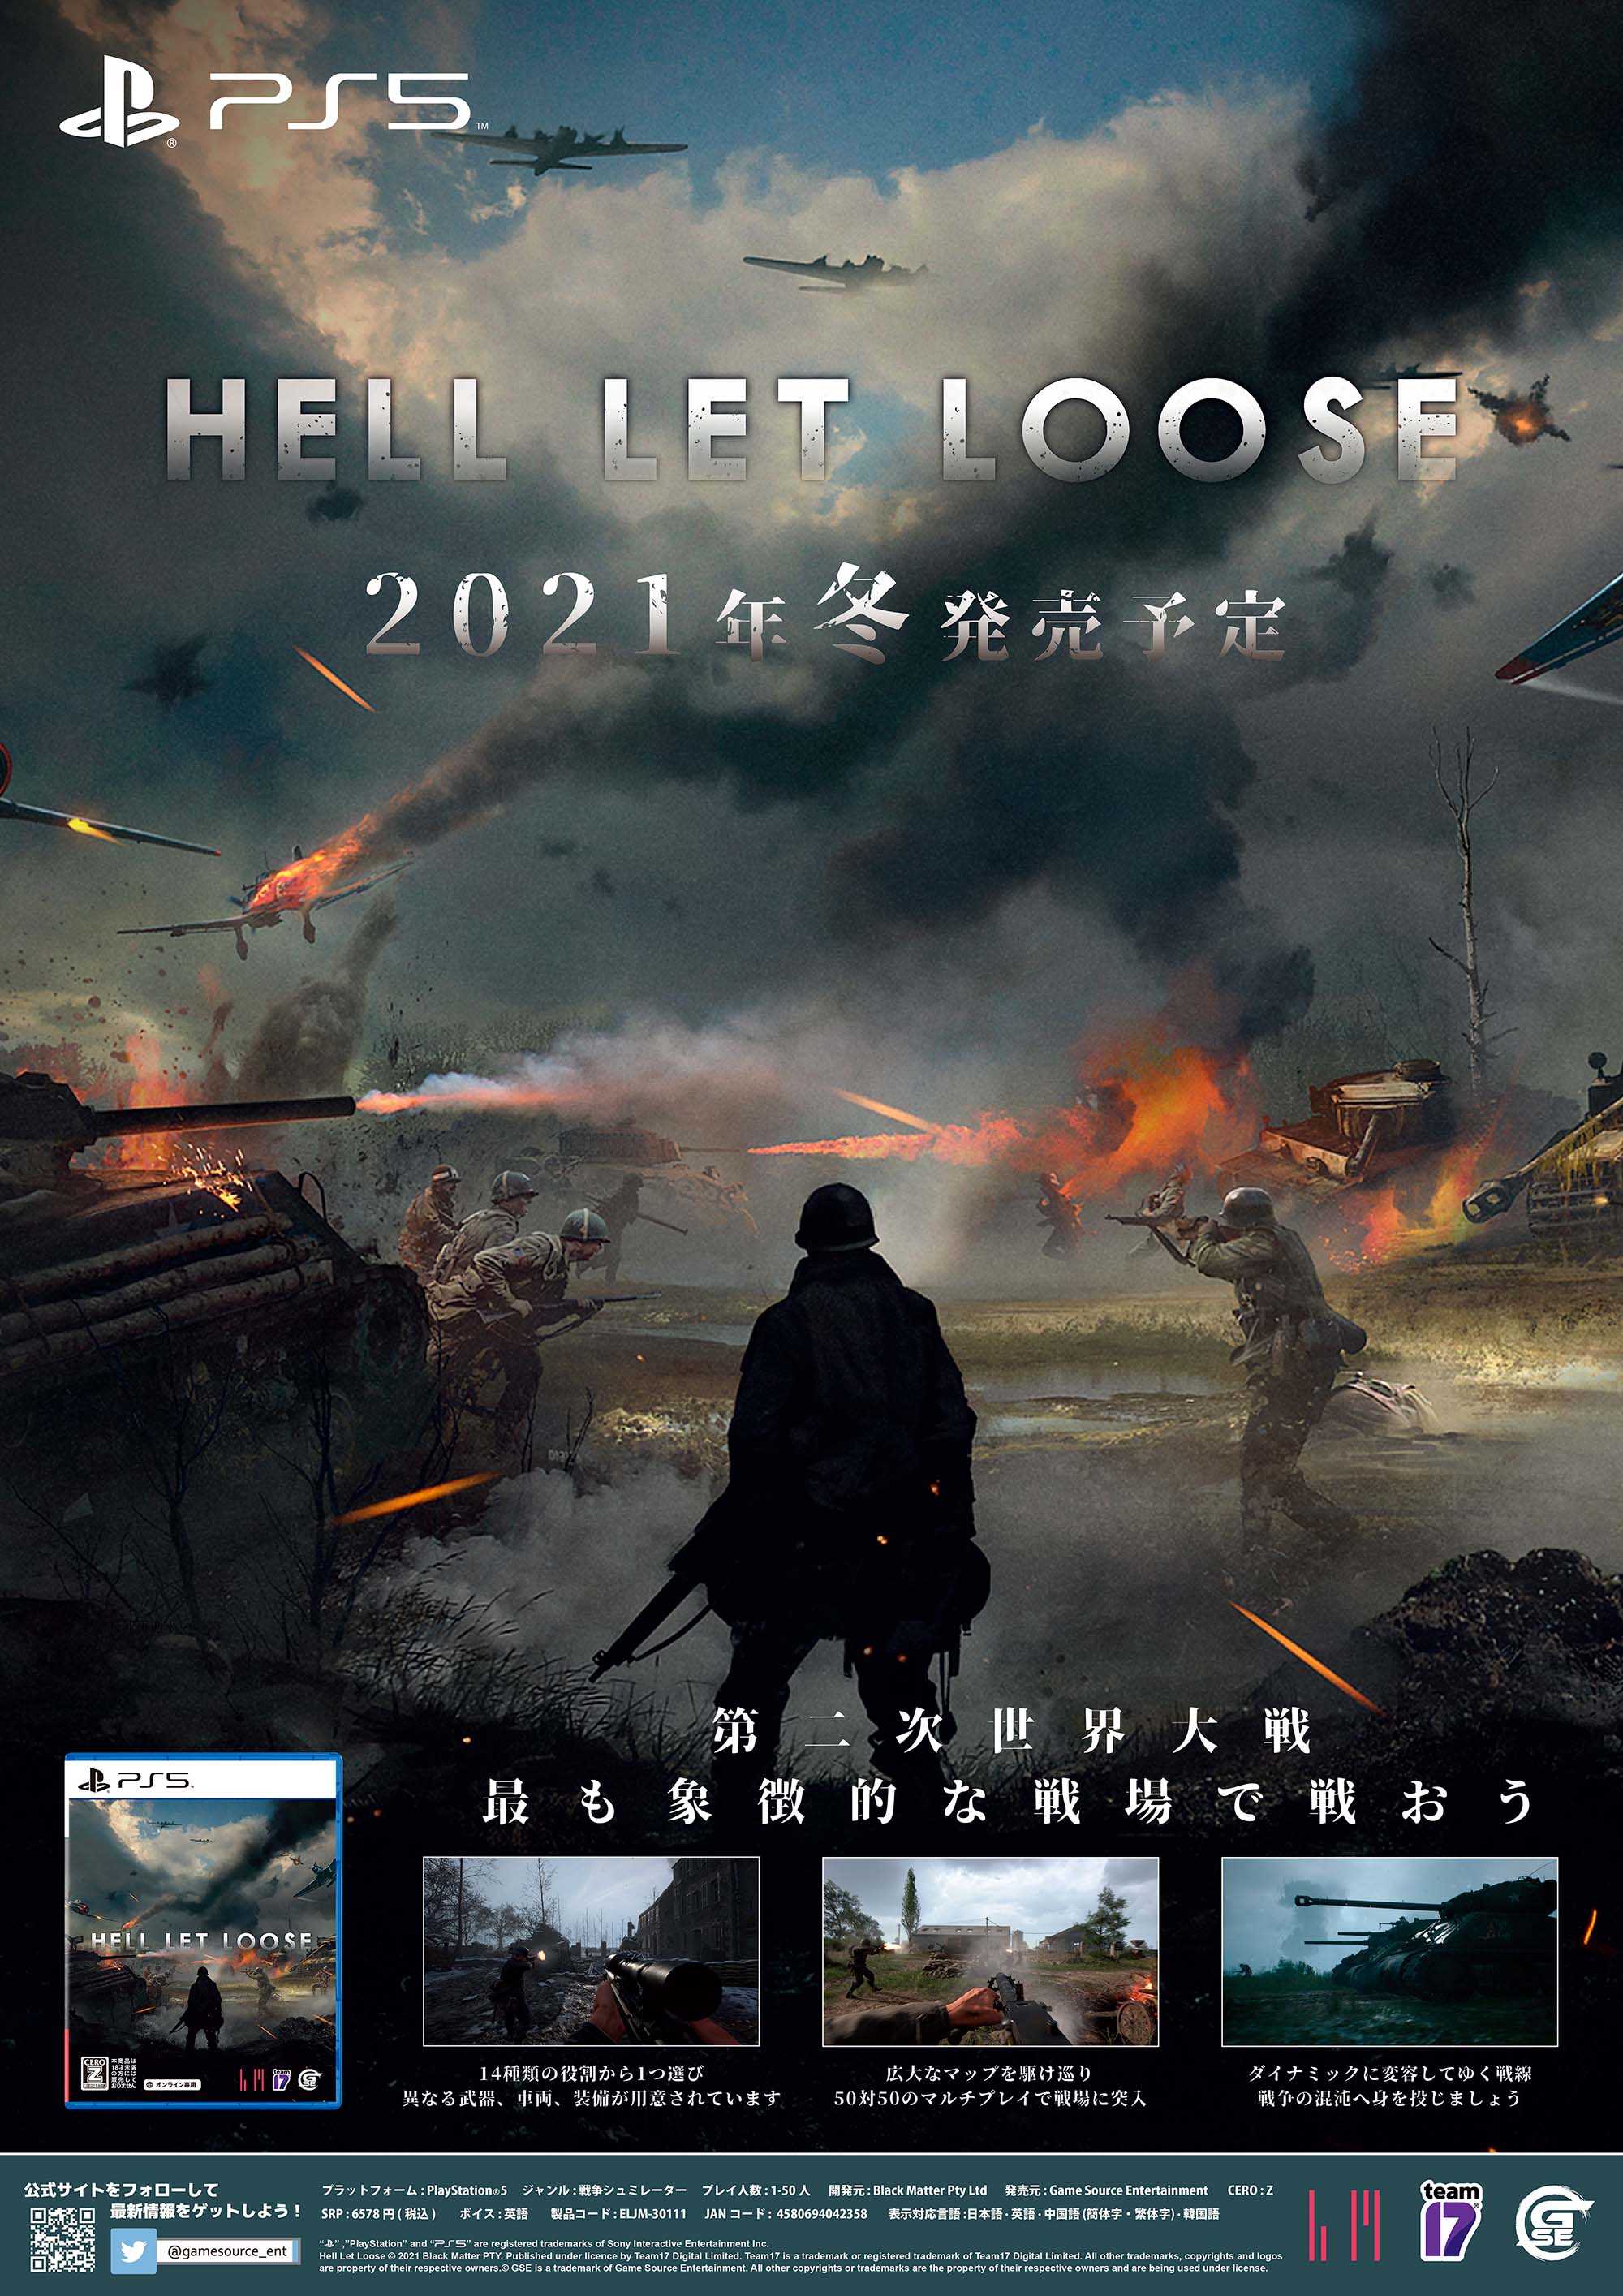 GSE - Game Source Entertainment - 家庭用ゲーム 発売元 - | HELL LET LOOSE